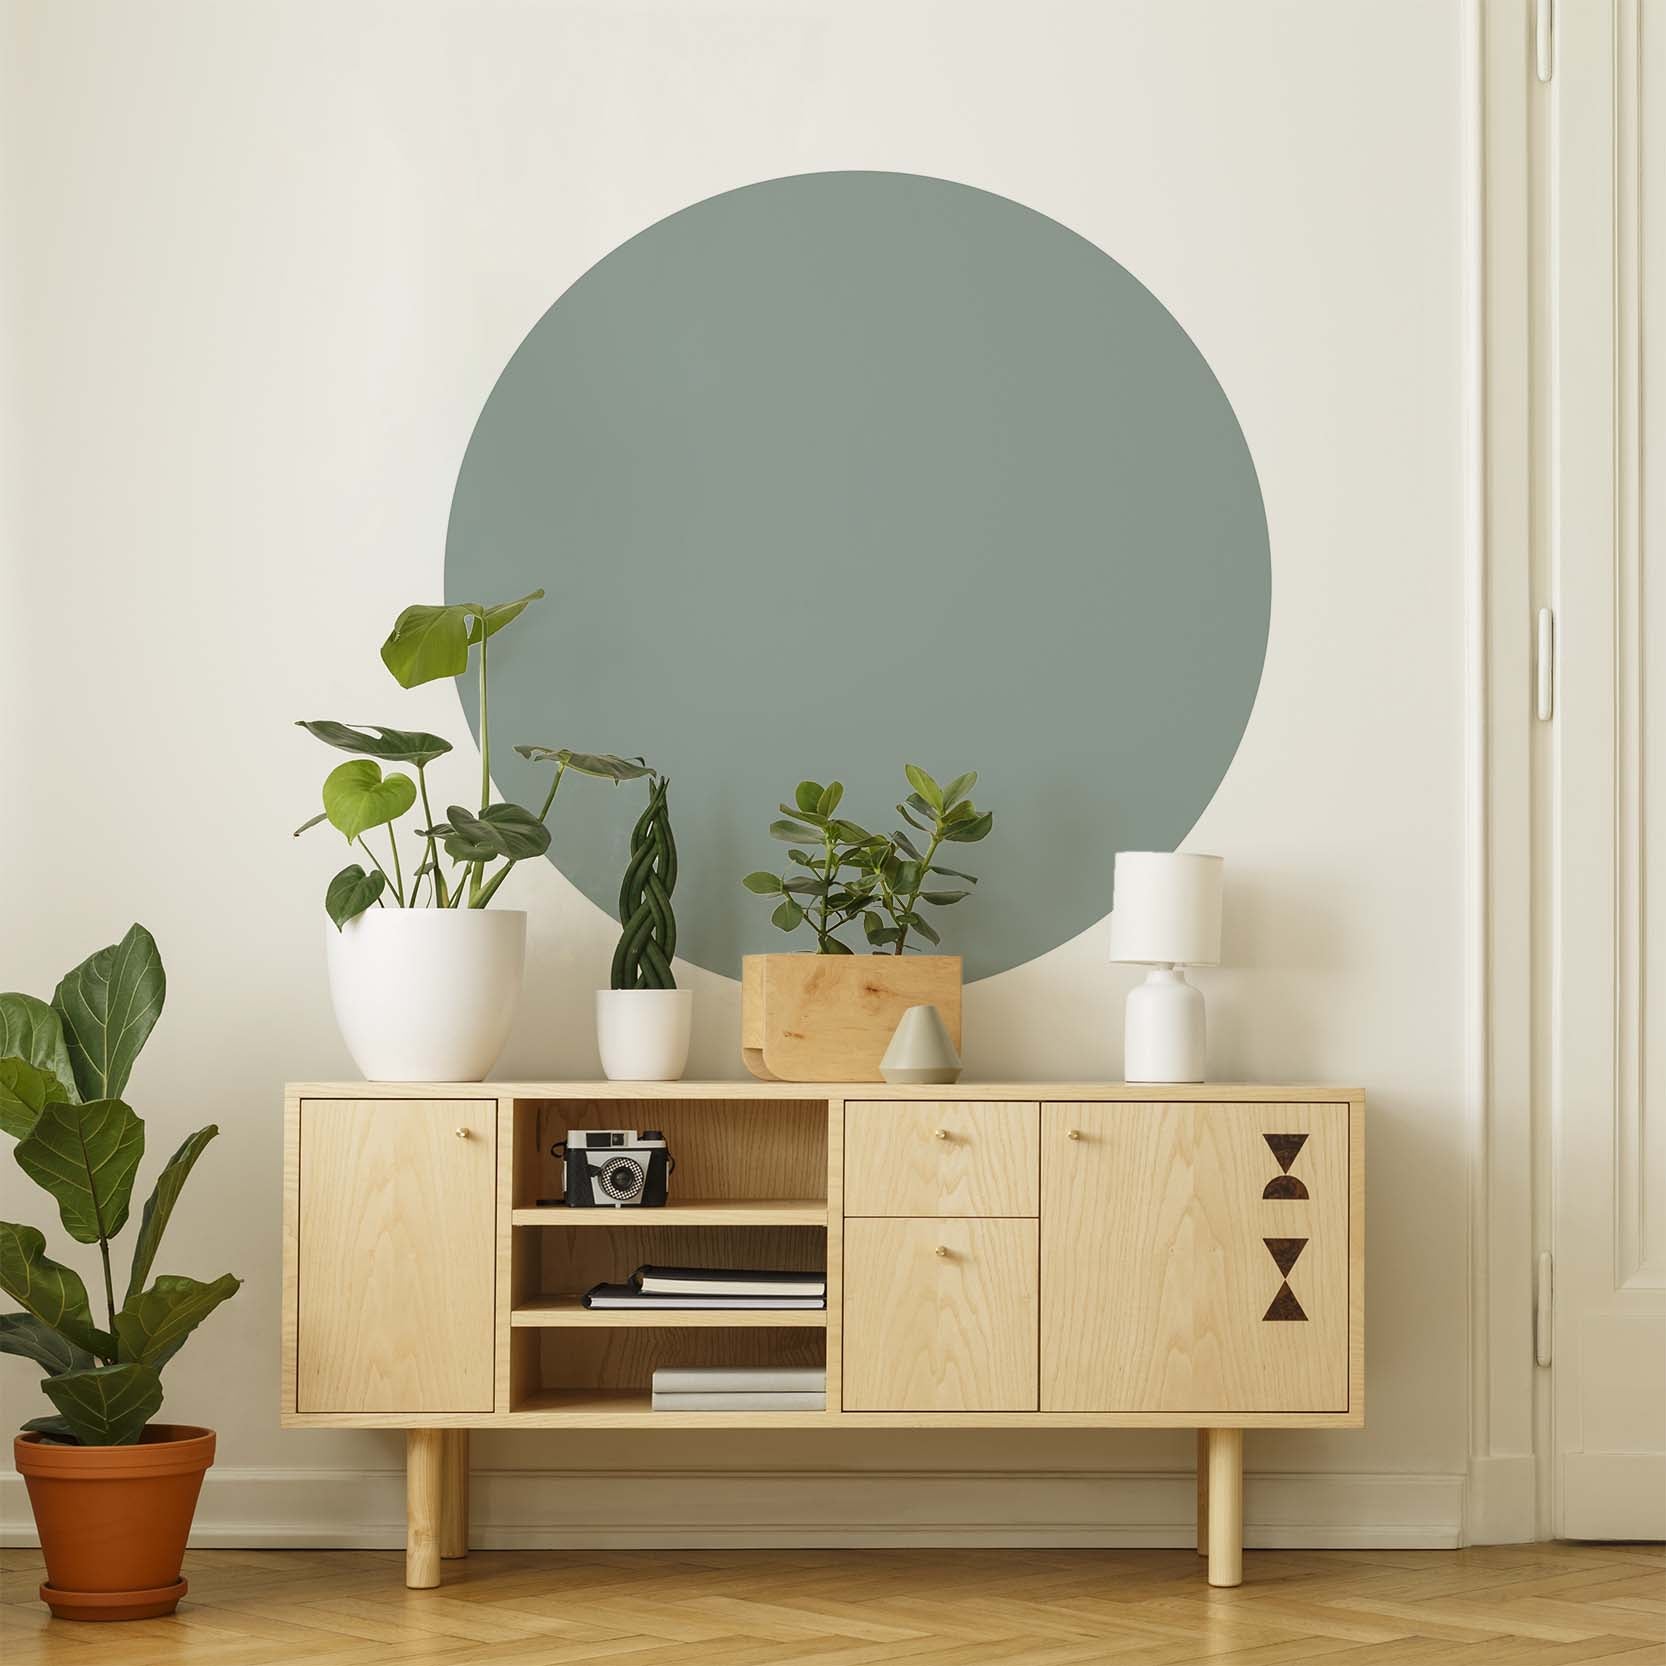 Image of Restowrap Green Round Wallsticker In Room With Wooden Cabinet Below It With Green Plants